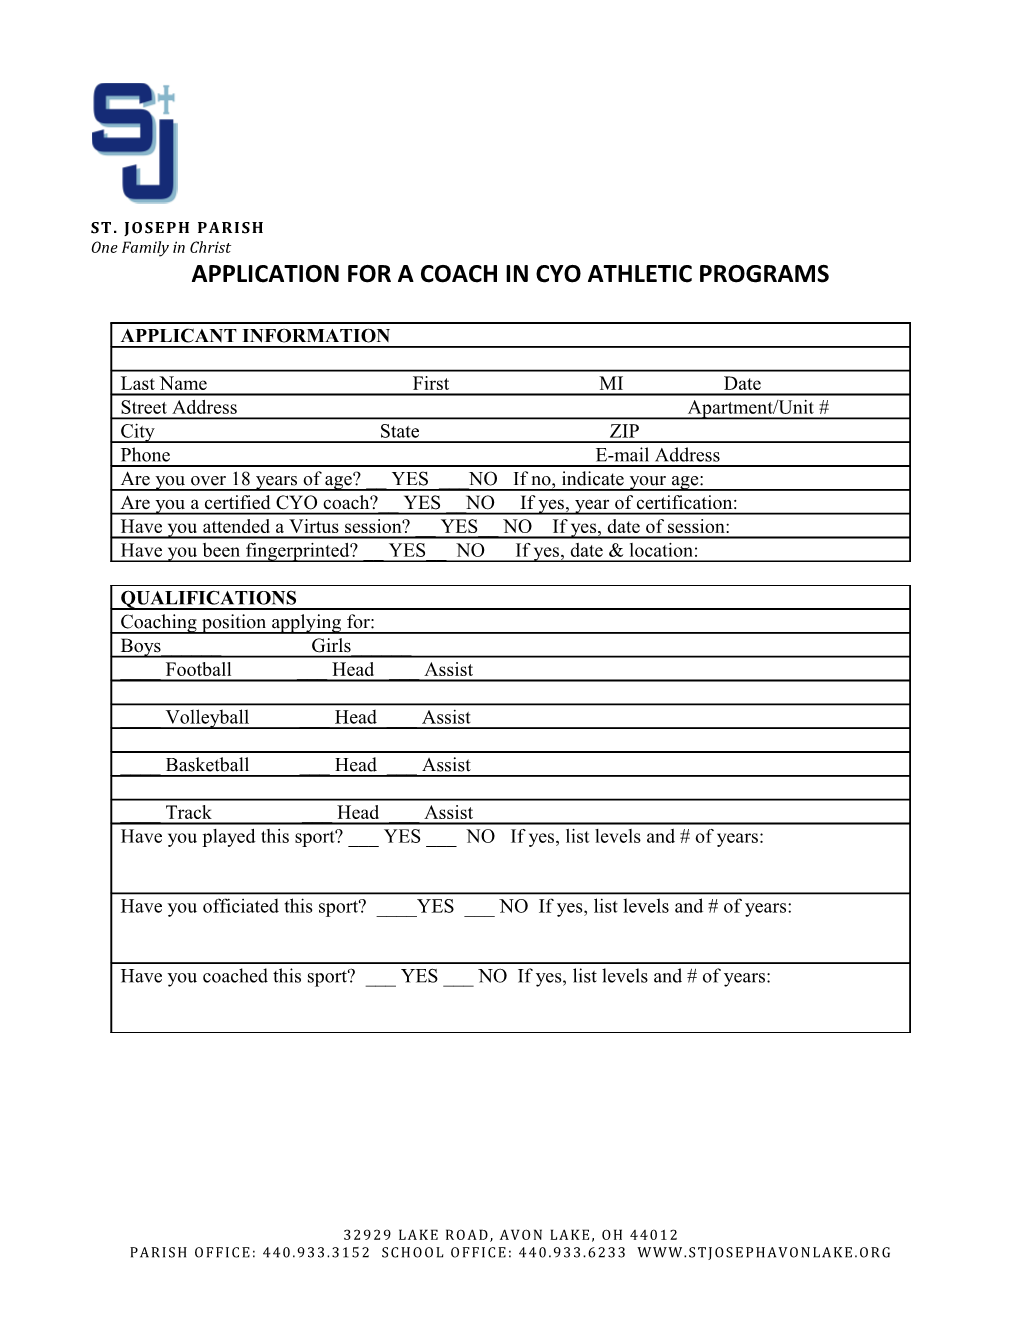 Application for a Coach in Cyo Athletic Programs